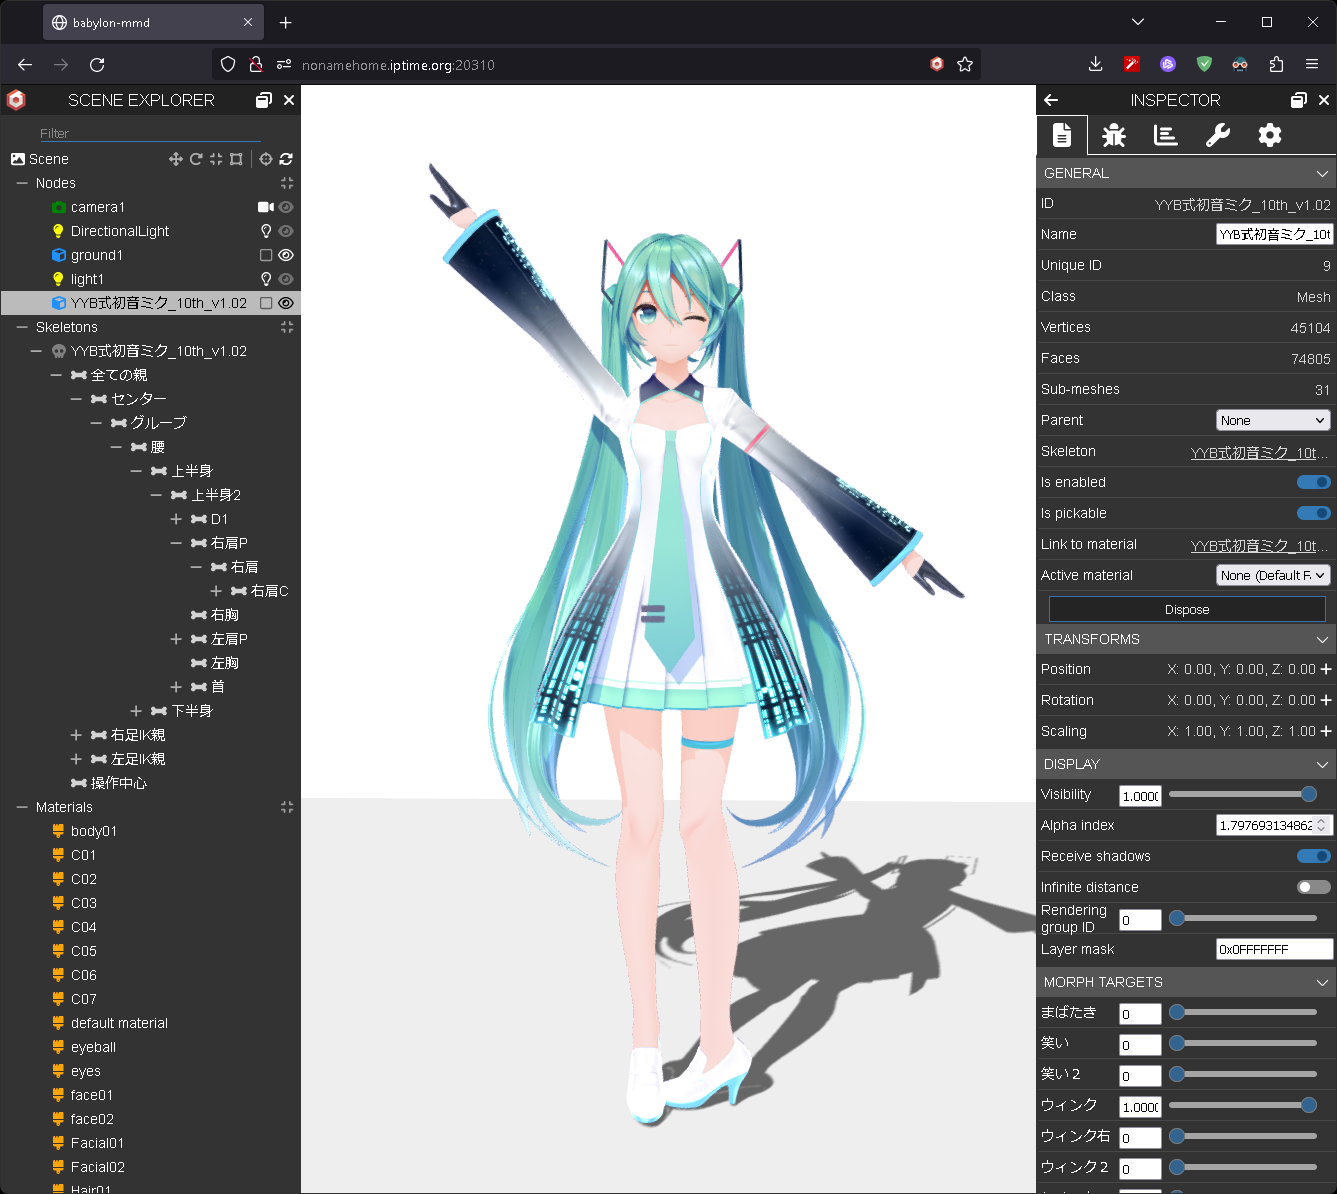 Screenshot showing the MMD model in the playground